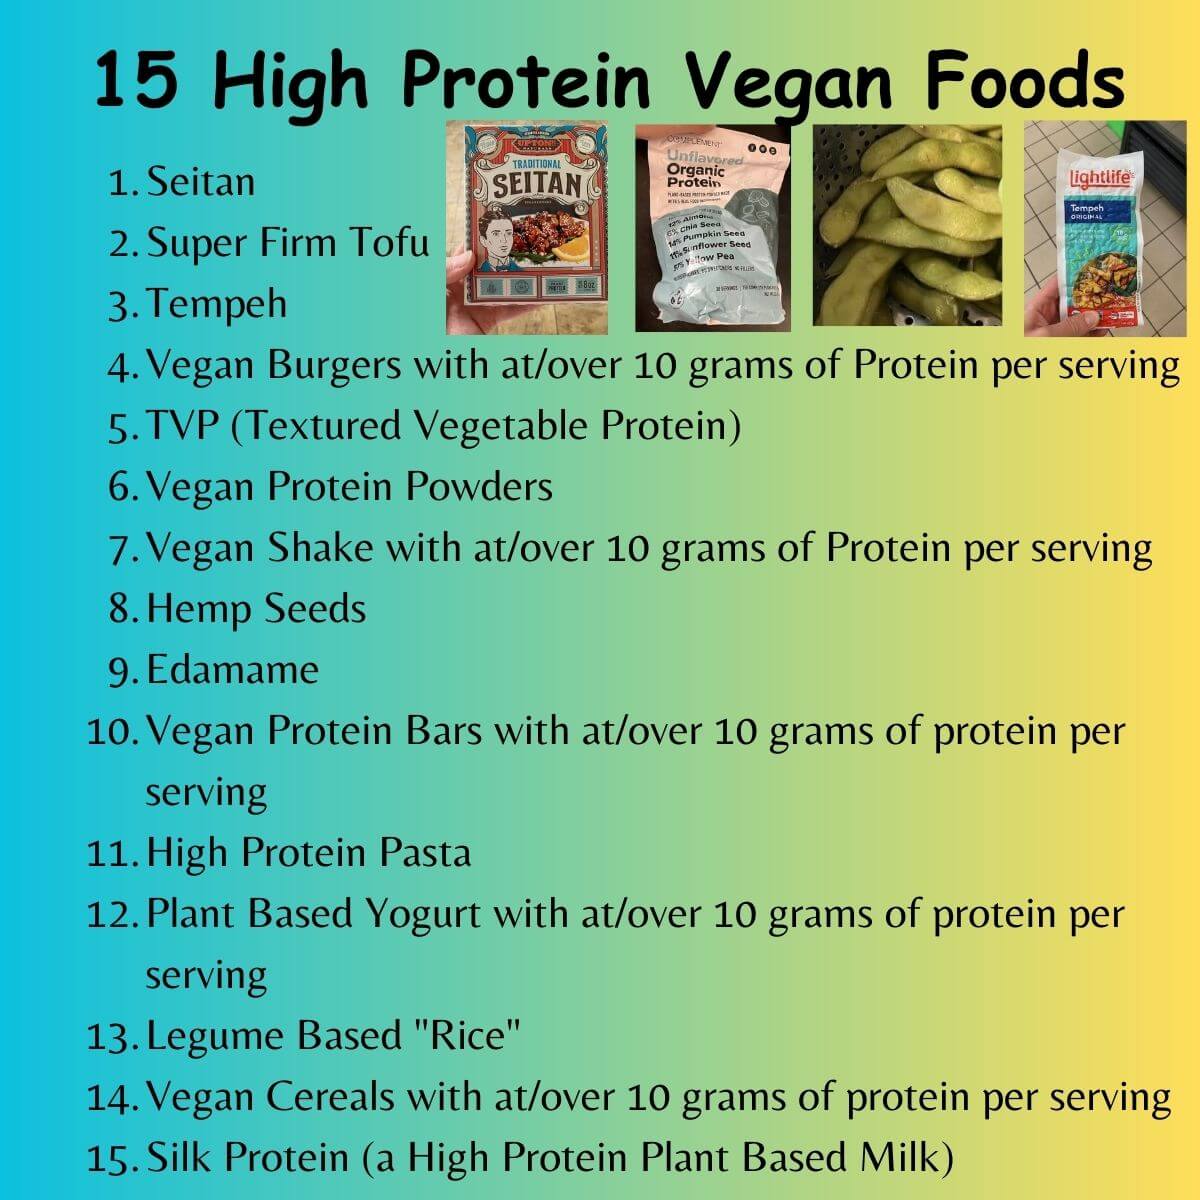 image listing 15 high protein vegan foods with a few images as examples (includes a picture of seitan, vegan protein powder, edamame, and tempeh). The list is written in the text of the blog post.